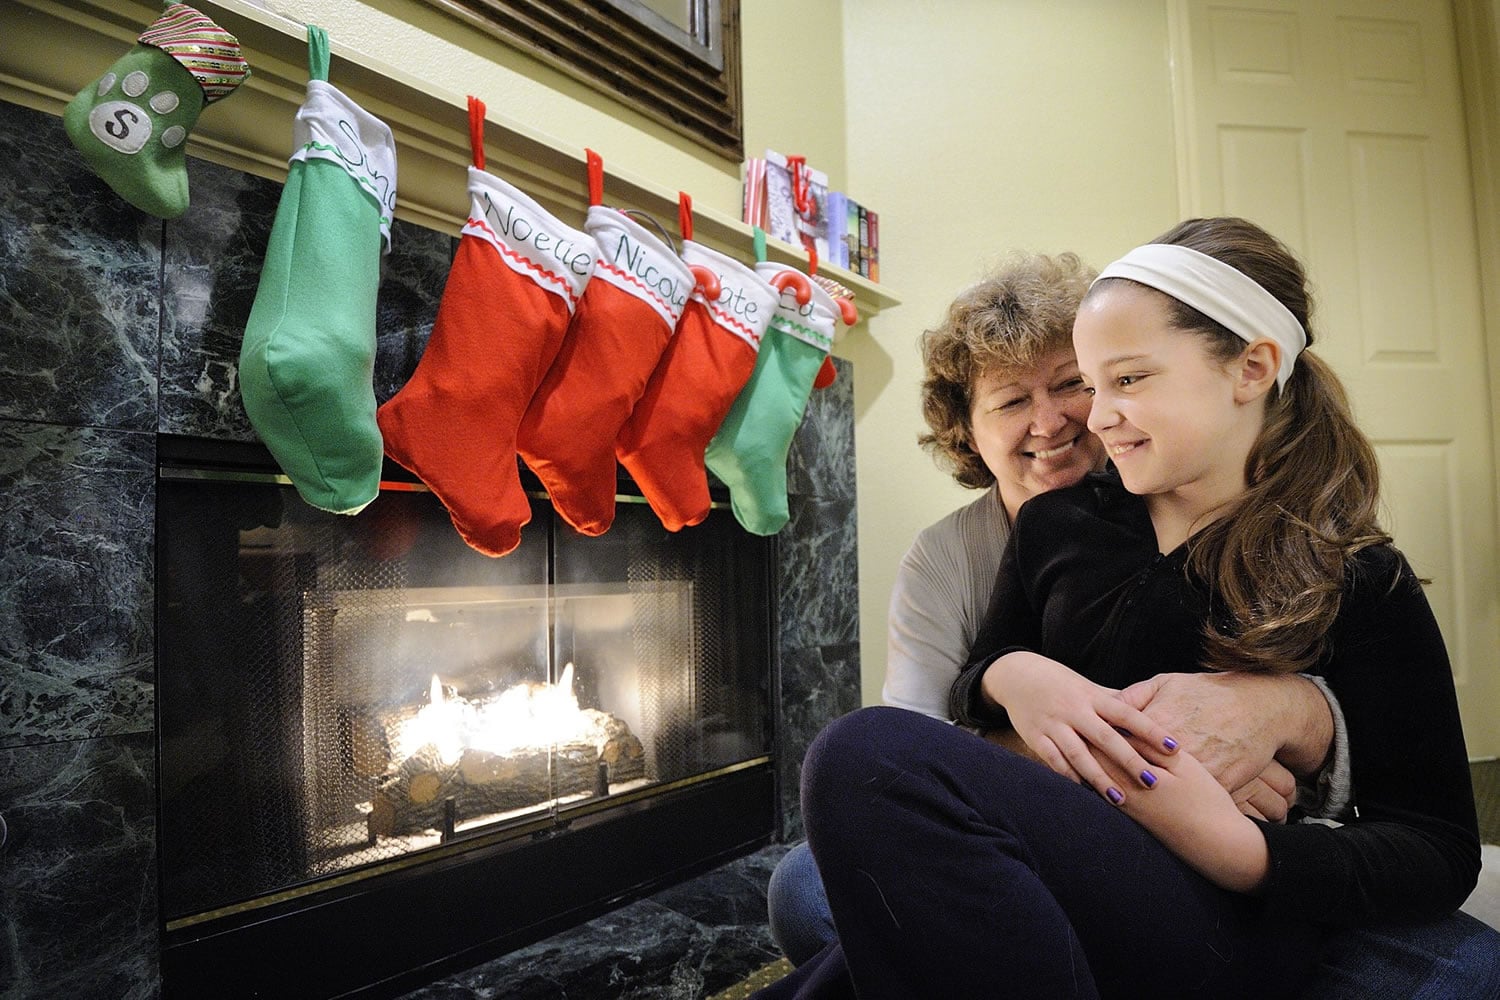 Sandy Scovil, left, holds her youngest daughter, Noelle, 11, in the family's temporary home, a two-bedroom hotel suite. The family was displaced after a fire caused substantial smoke damage to their Felida home on Dec.